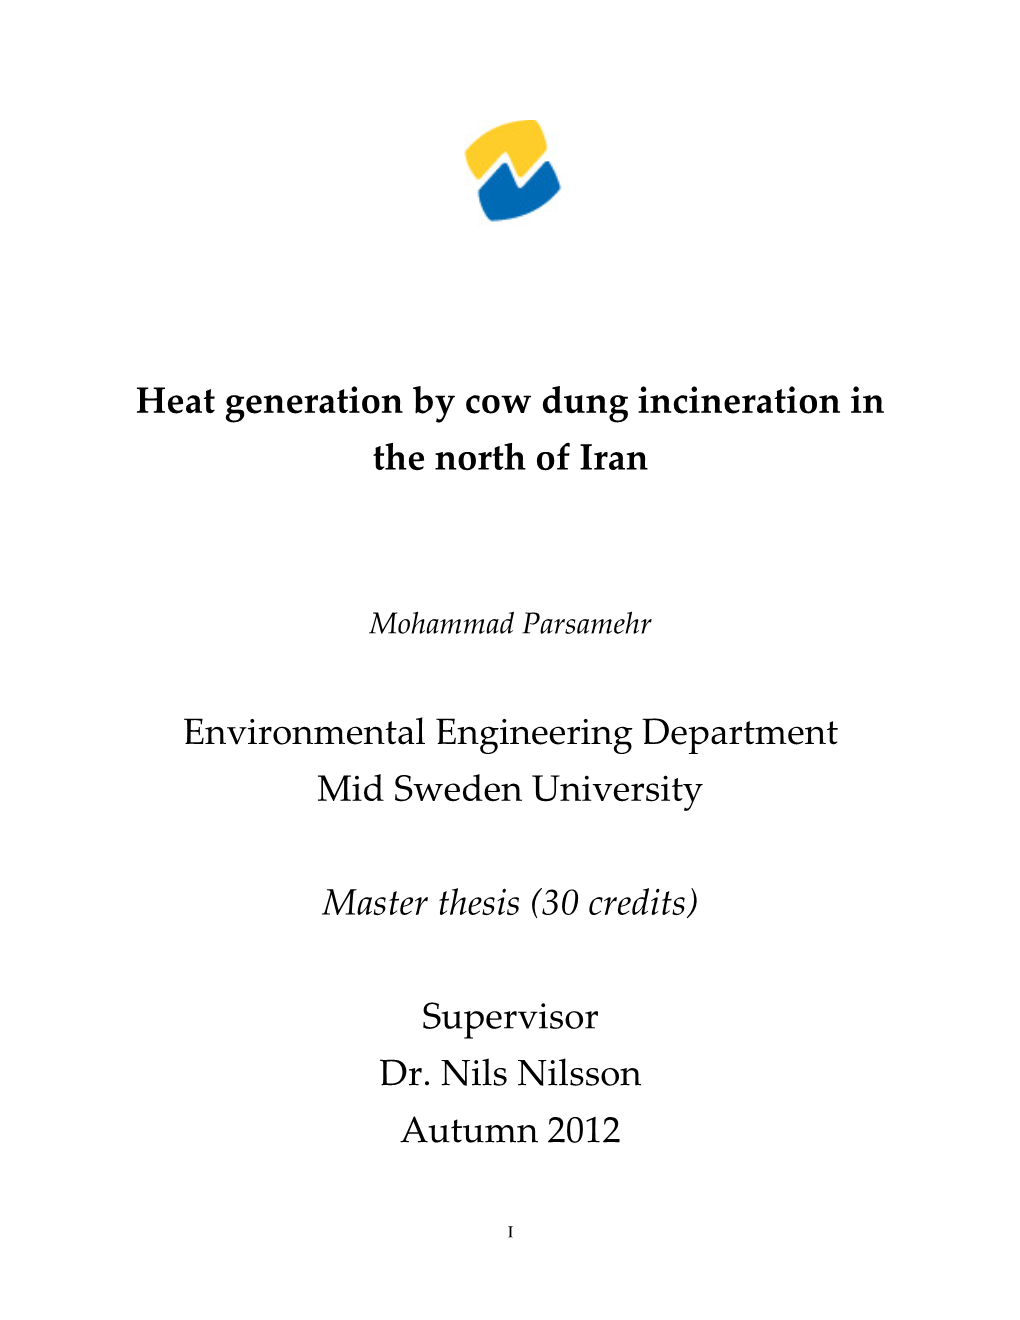 Heat Generation by Cow Dung Incineration in the North of Iran